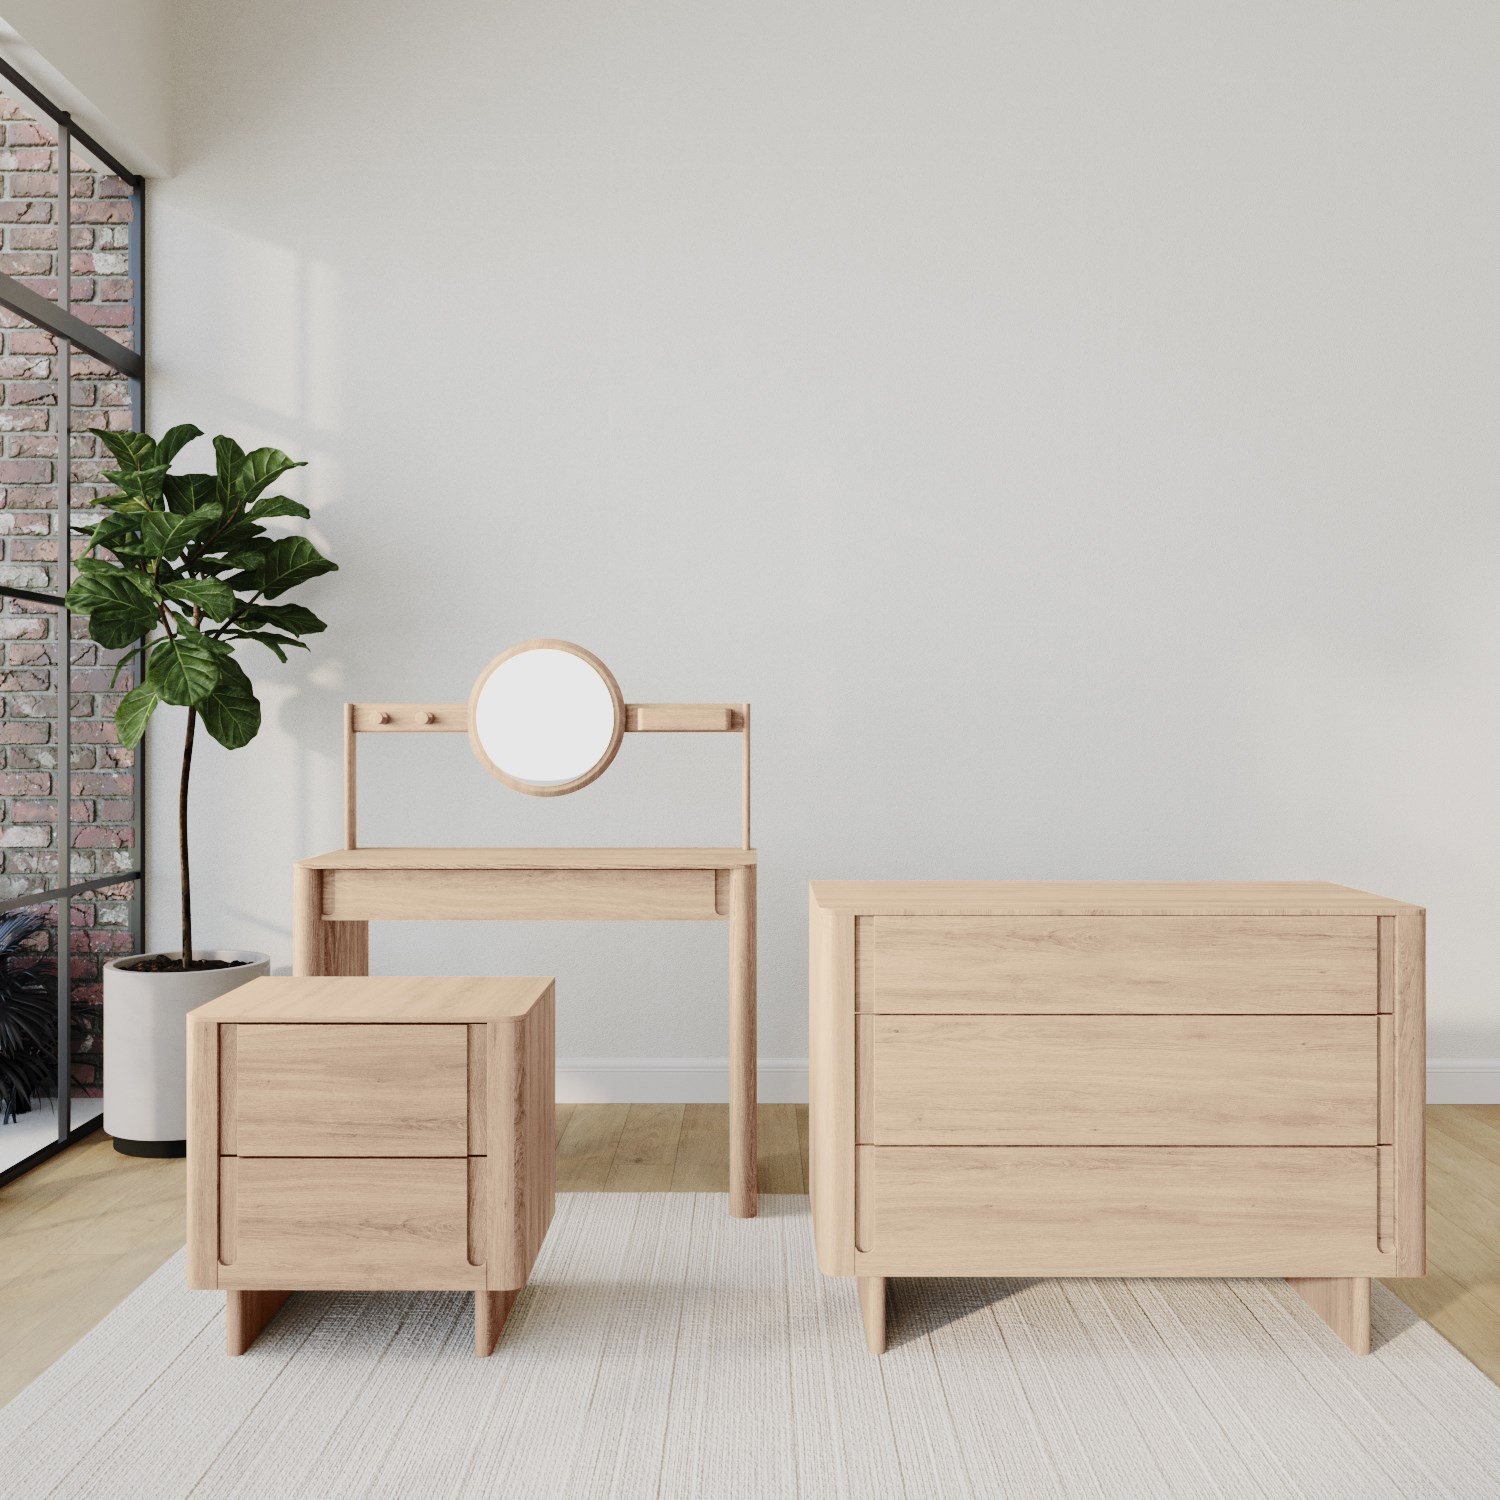 Photo of Light wood 3 piece bedroom furniture set with dressing table - emile sustainable furniture